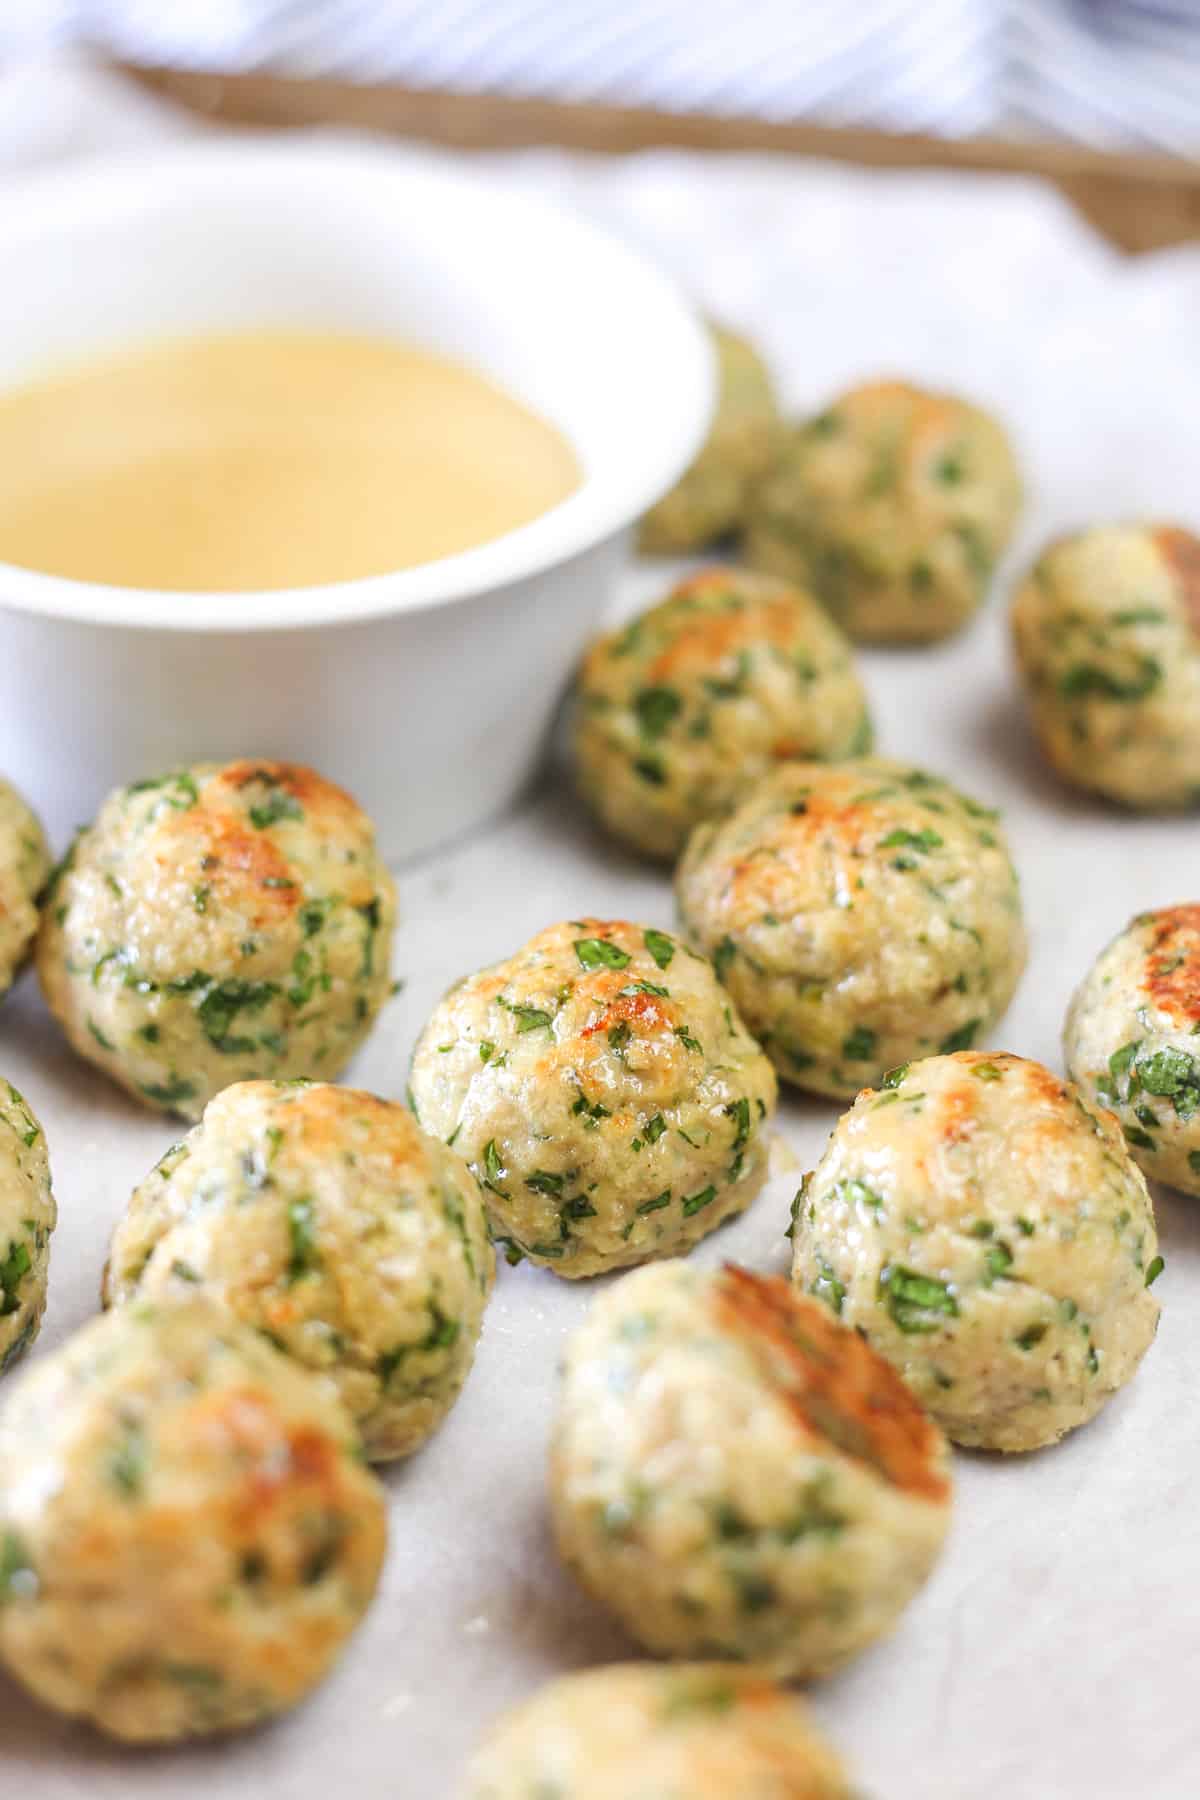 Chicken meatballs being served with honey mustard dipping sauce.